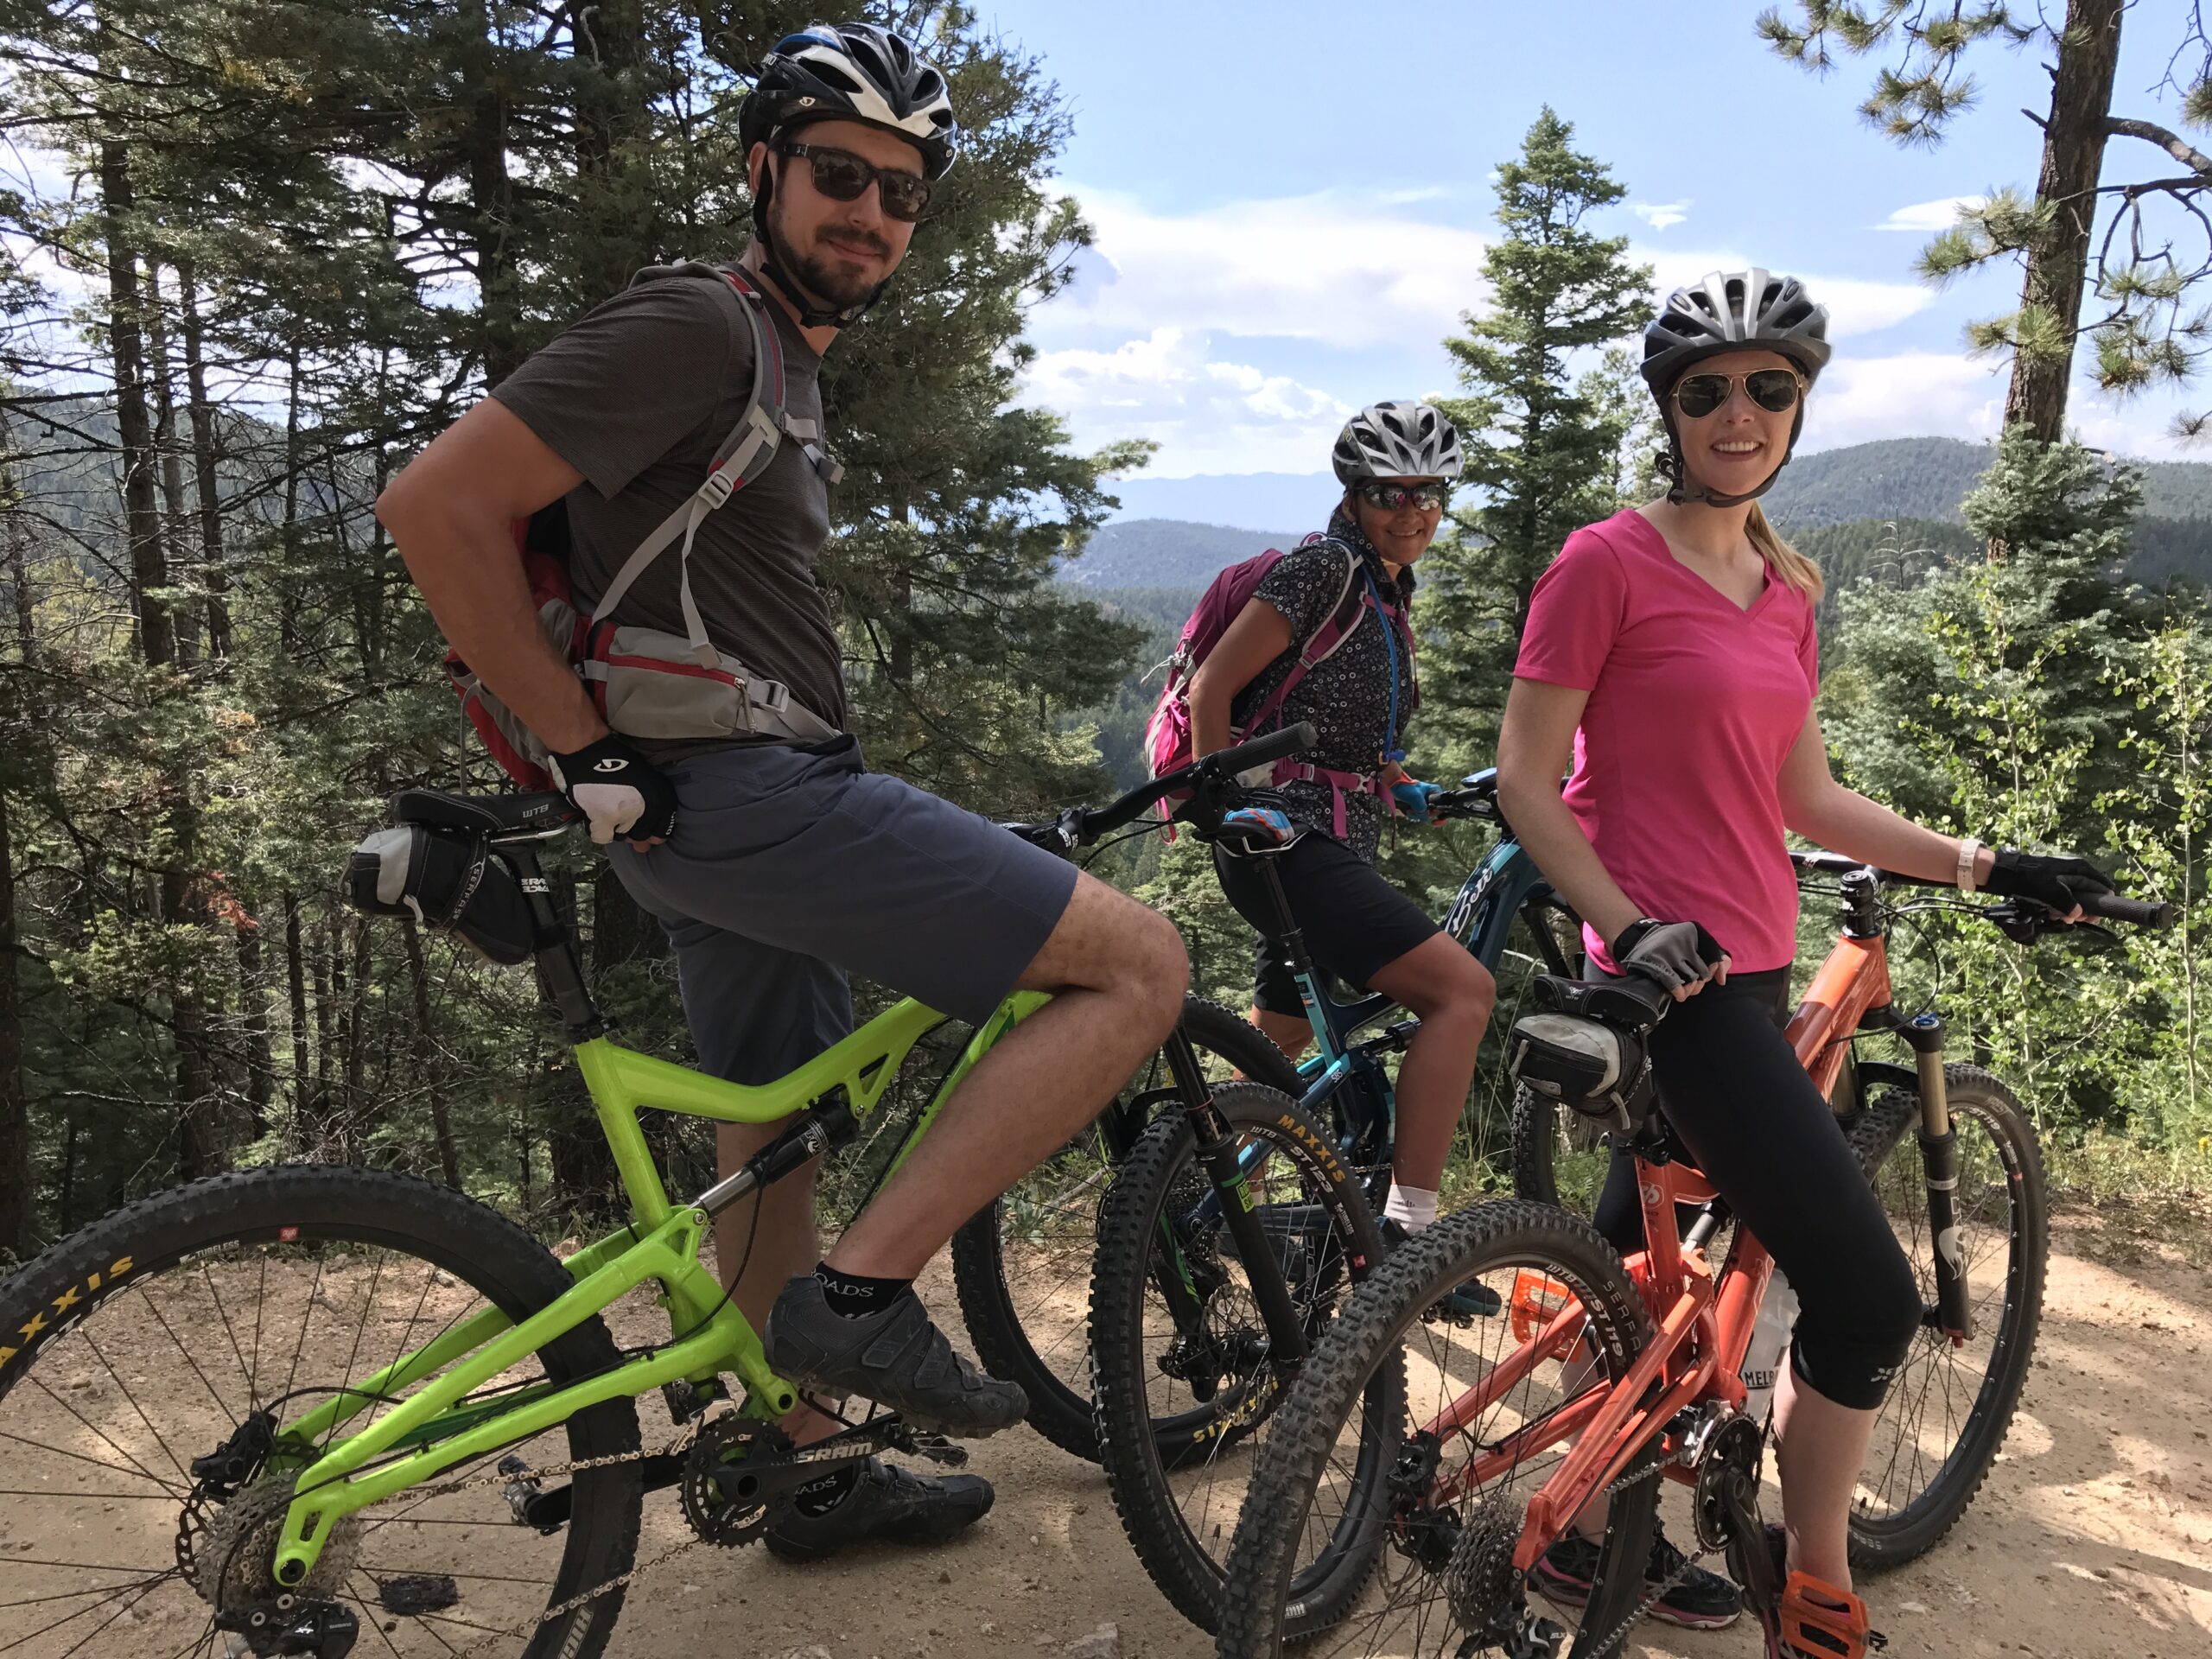 Biking the Santa Fe National Forest for Travels with Darley